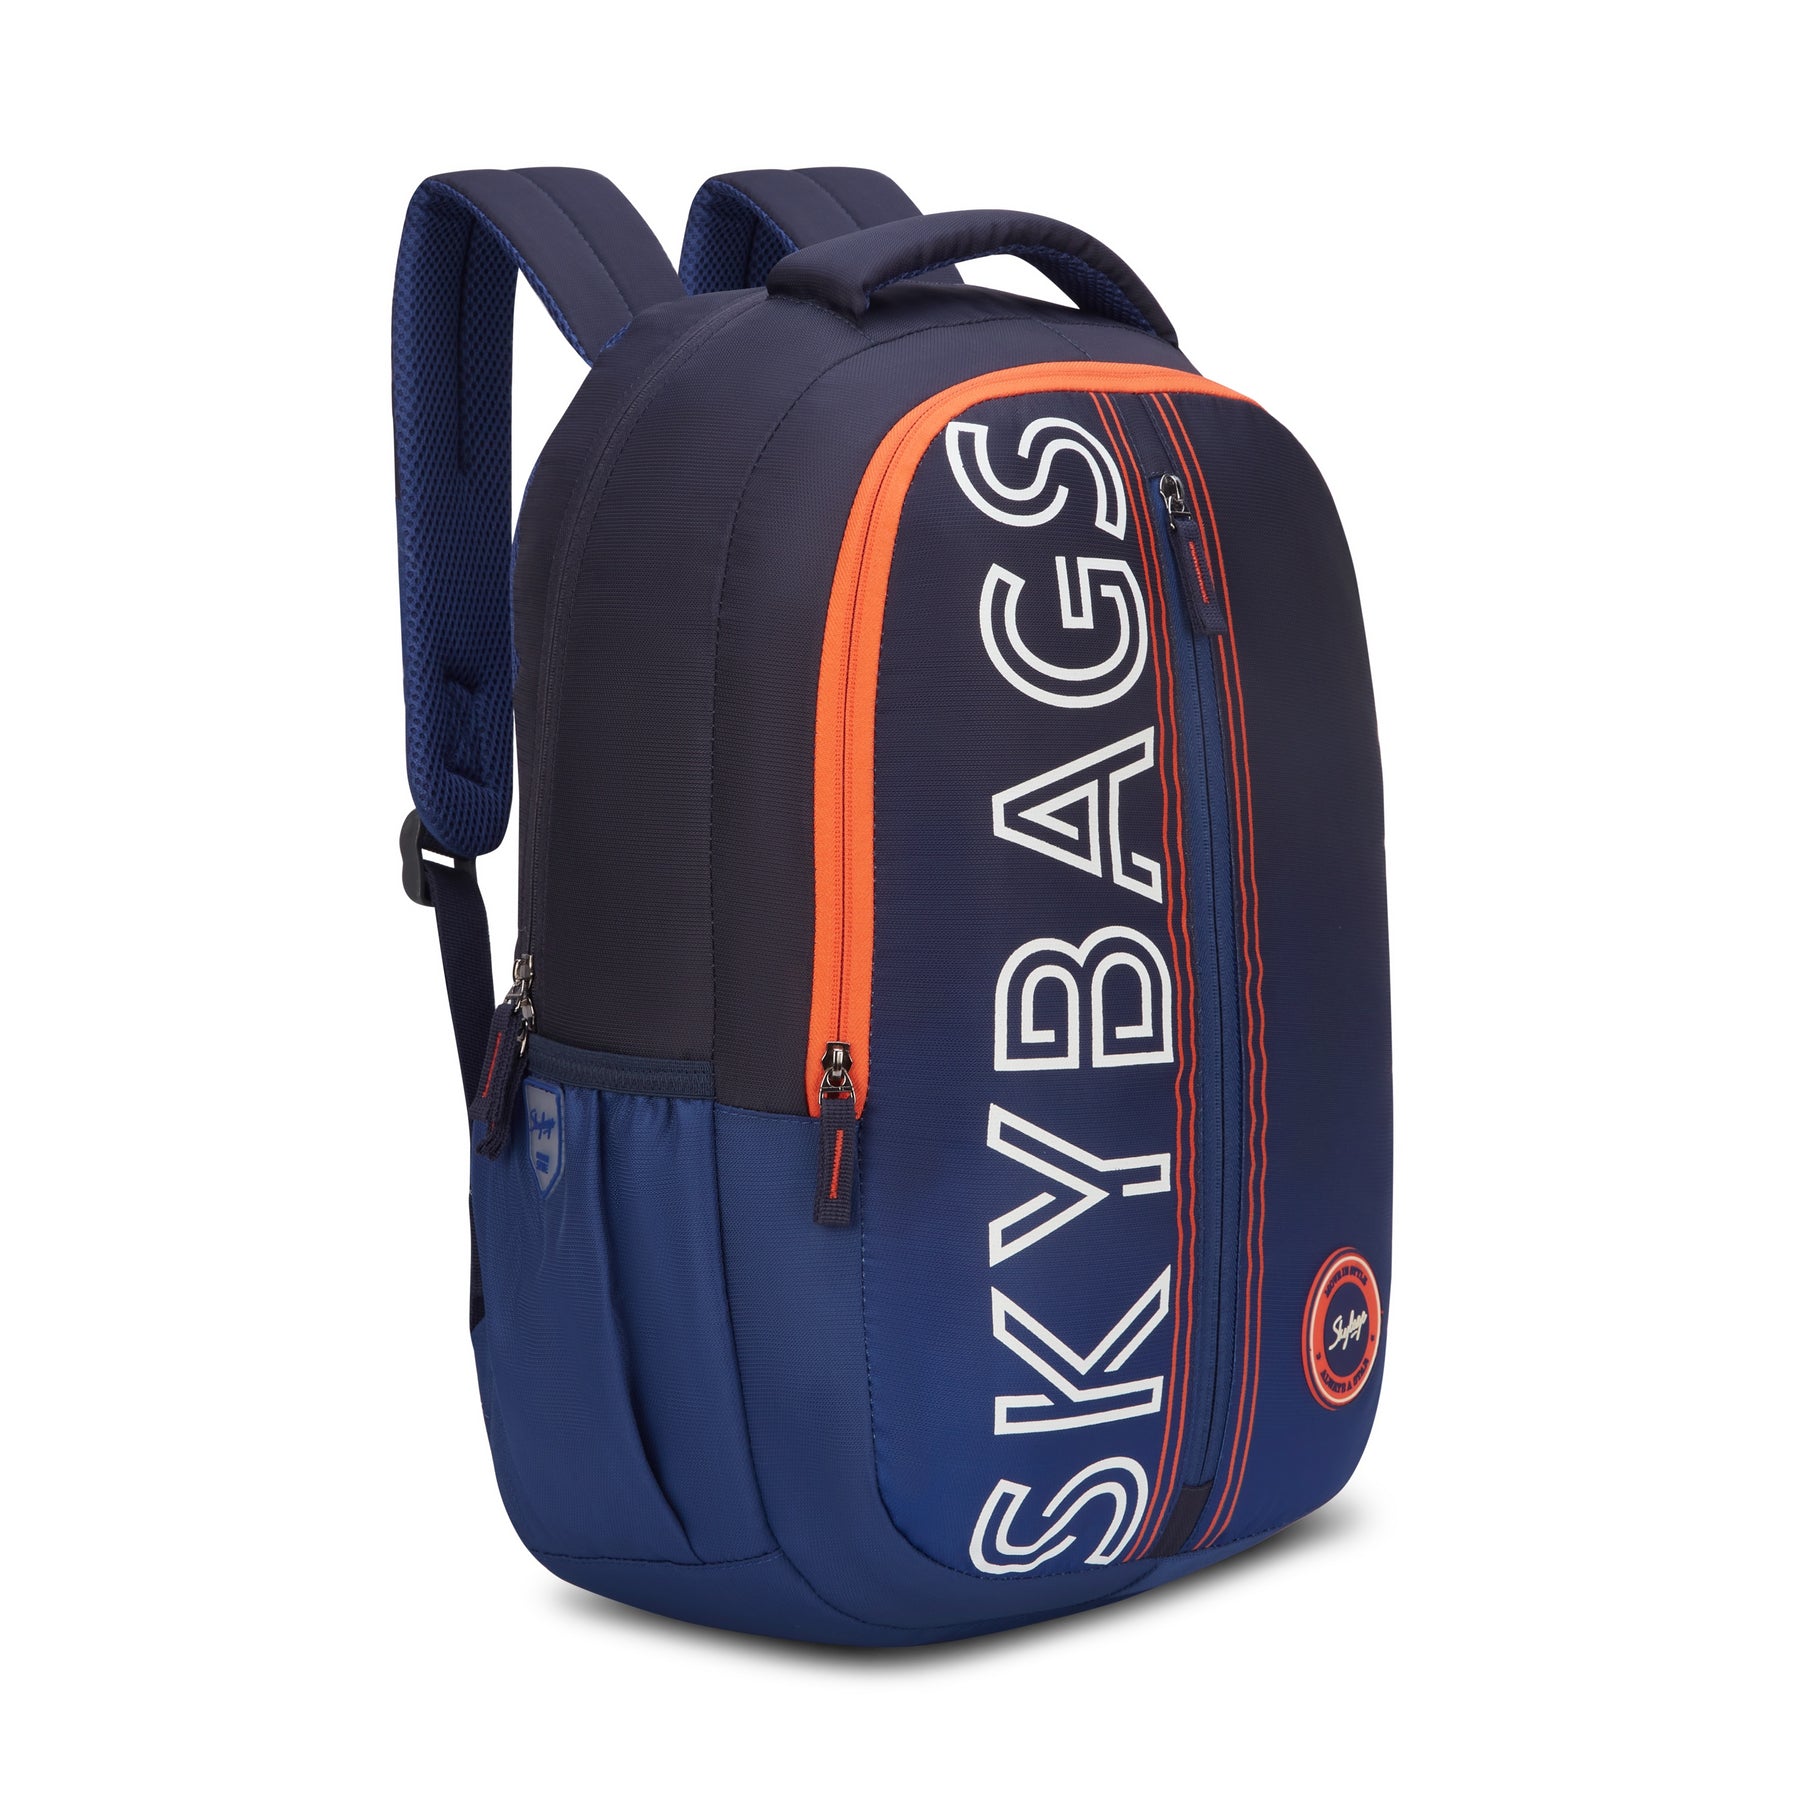 Skybags Blue Laptop Backpack Bags, Travel Bag Office Bags at Rs 399 in New  Delhi